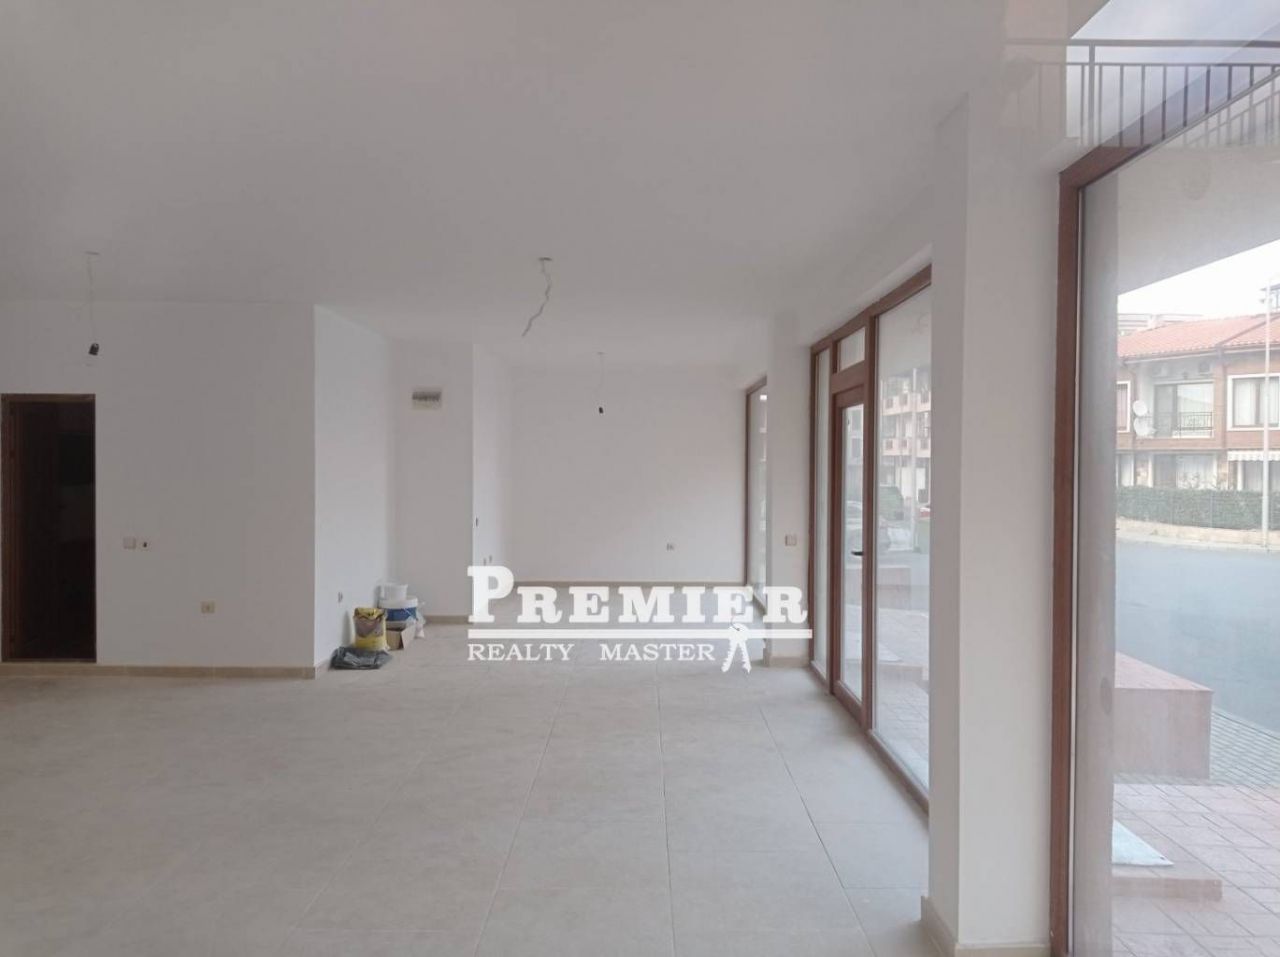 Commercial property in Nesebar, Bulgaria, 85 sq.m - picture 1